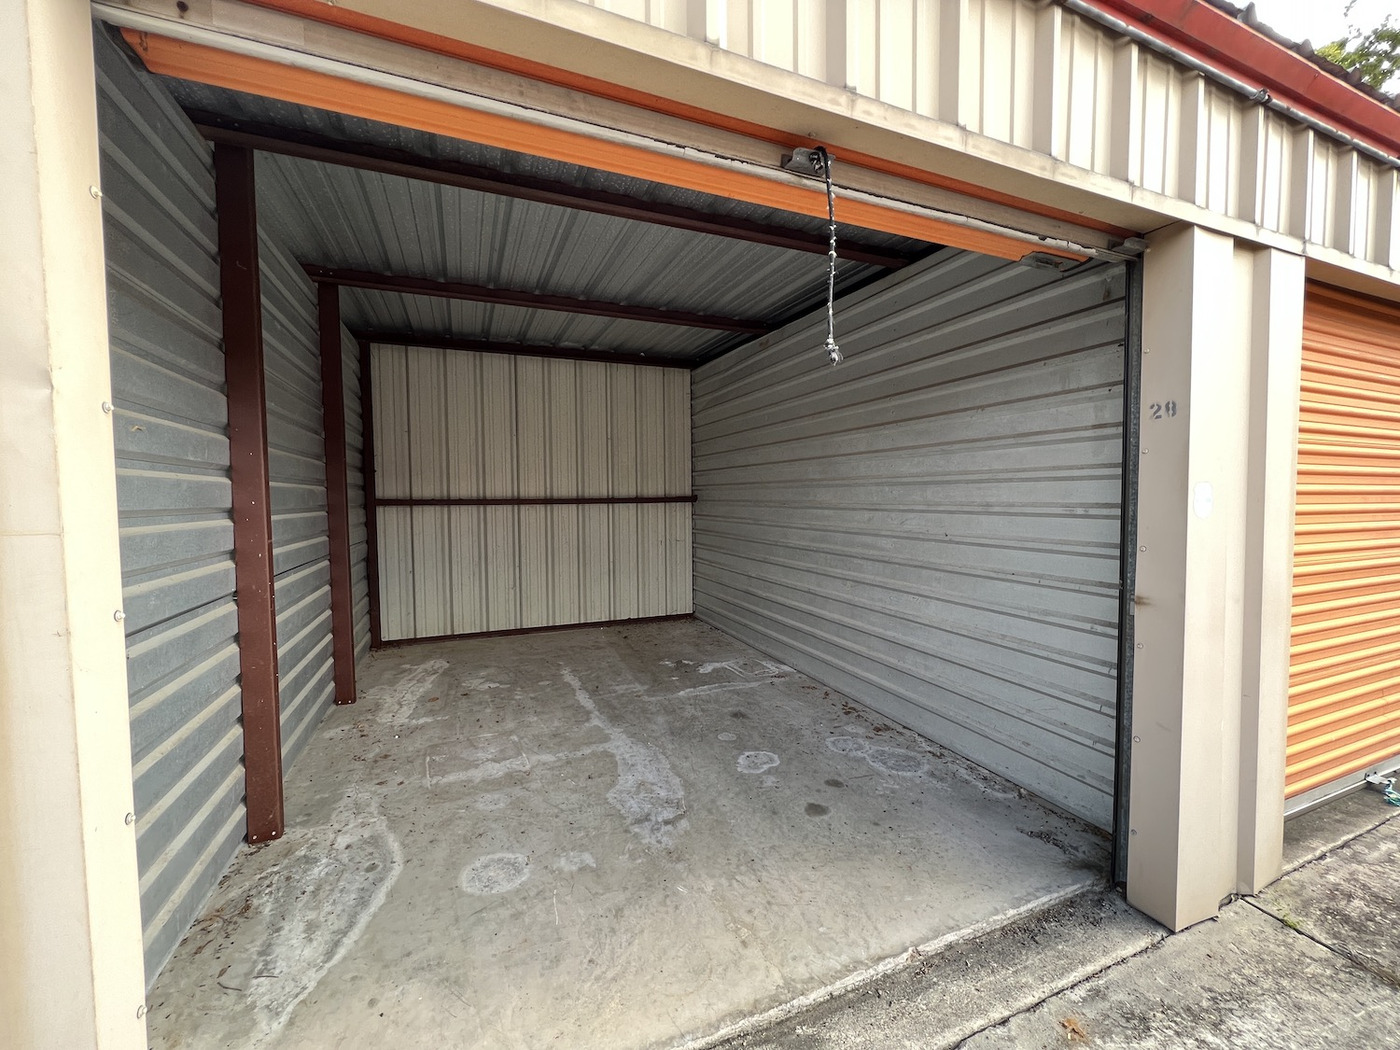 FM1266 Self Storage is a premier storage facility located in Kemah, Texas, dedicated to providing high-quality storage solutions for personal and business needs.